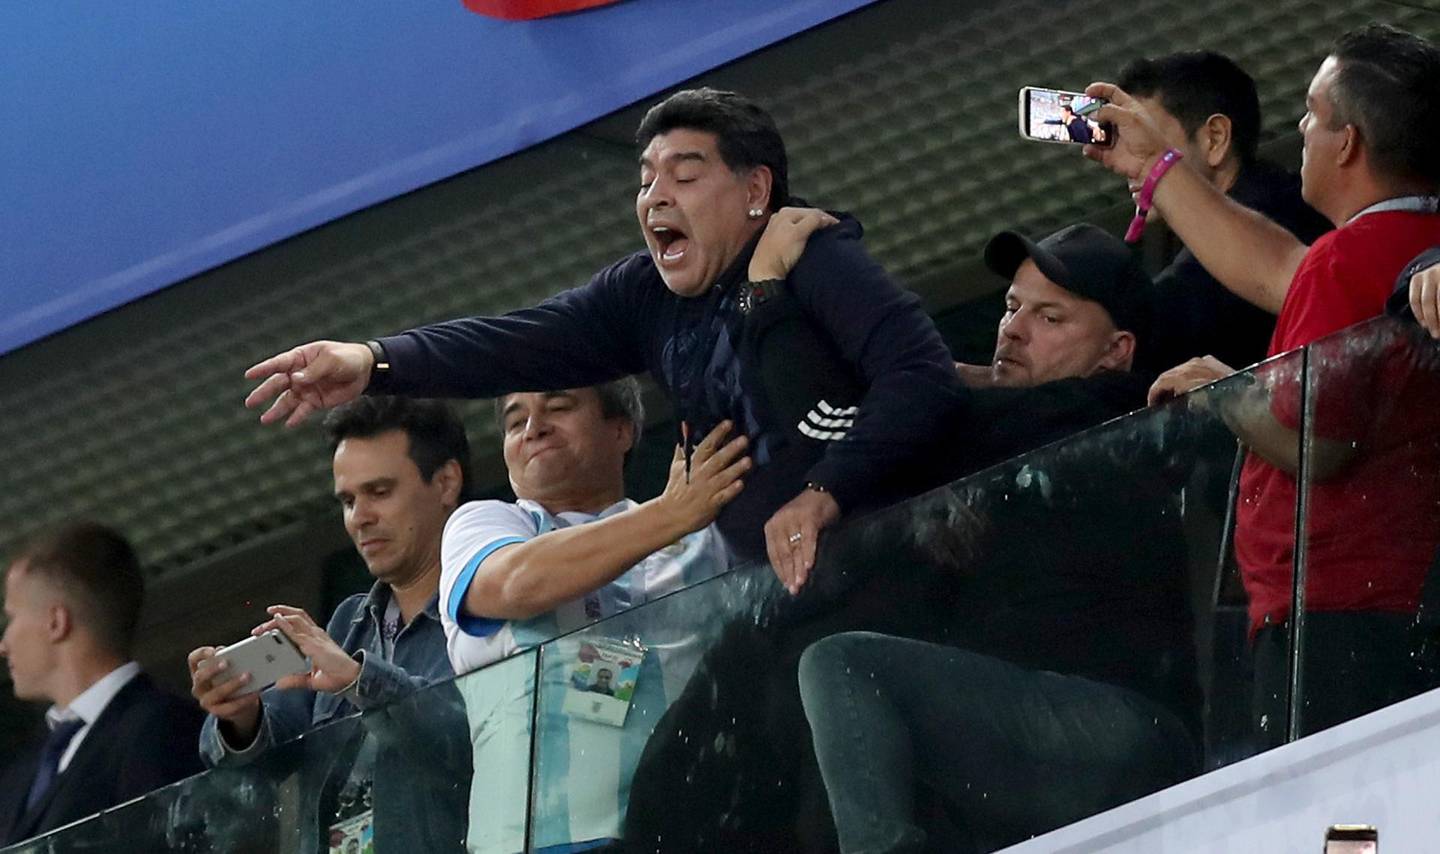 SAINT PETERSBURG, RUSSIA - JUNE 26:  Diego Armando Maradona celebrates Argentina's victory following the 2018 FIFA World Cup Russia group D match between Nigeria and Argentina at Saint Petersburg Stadium on June 26, 2018 in Saint Petersburg, Russia.  (Photo by Alex Morton/Getty Images)